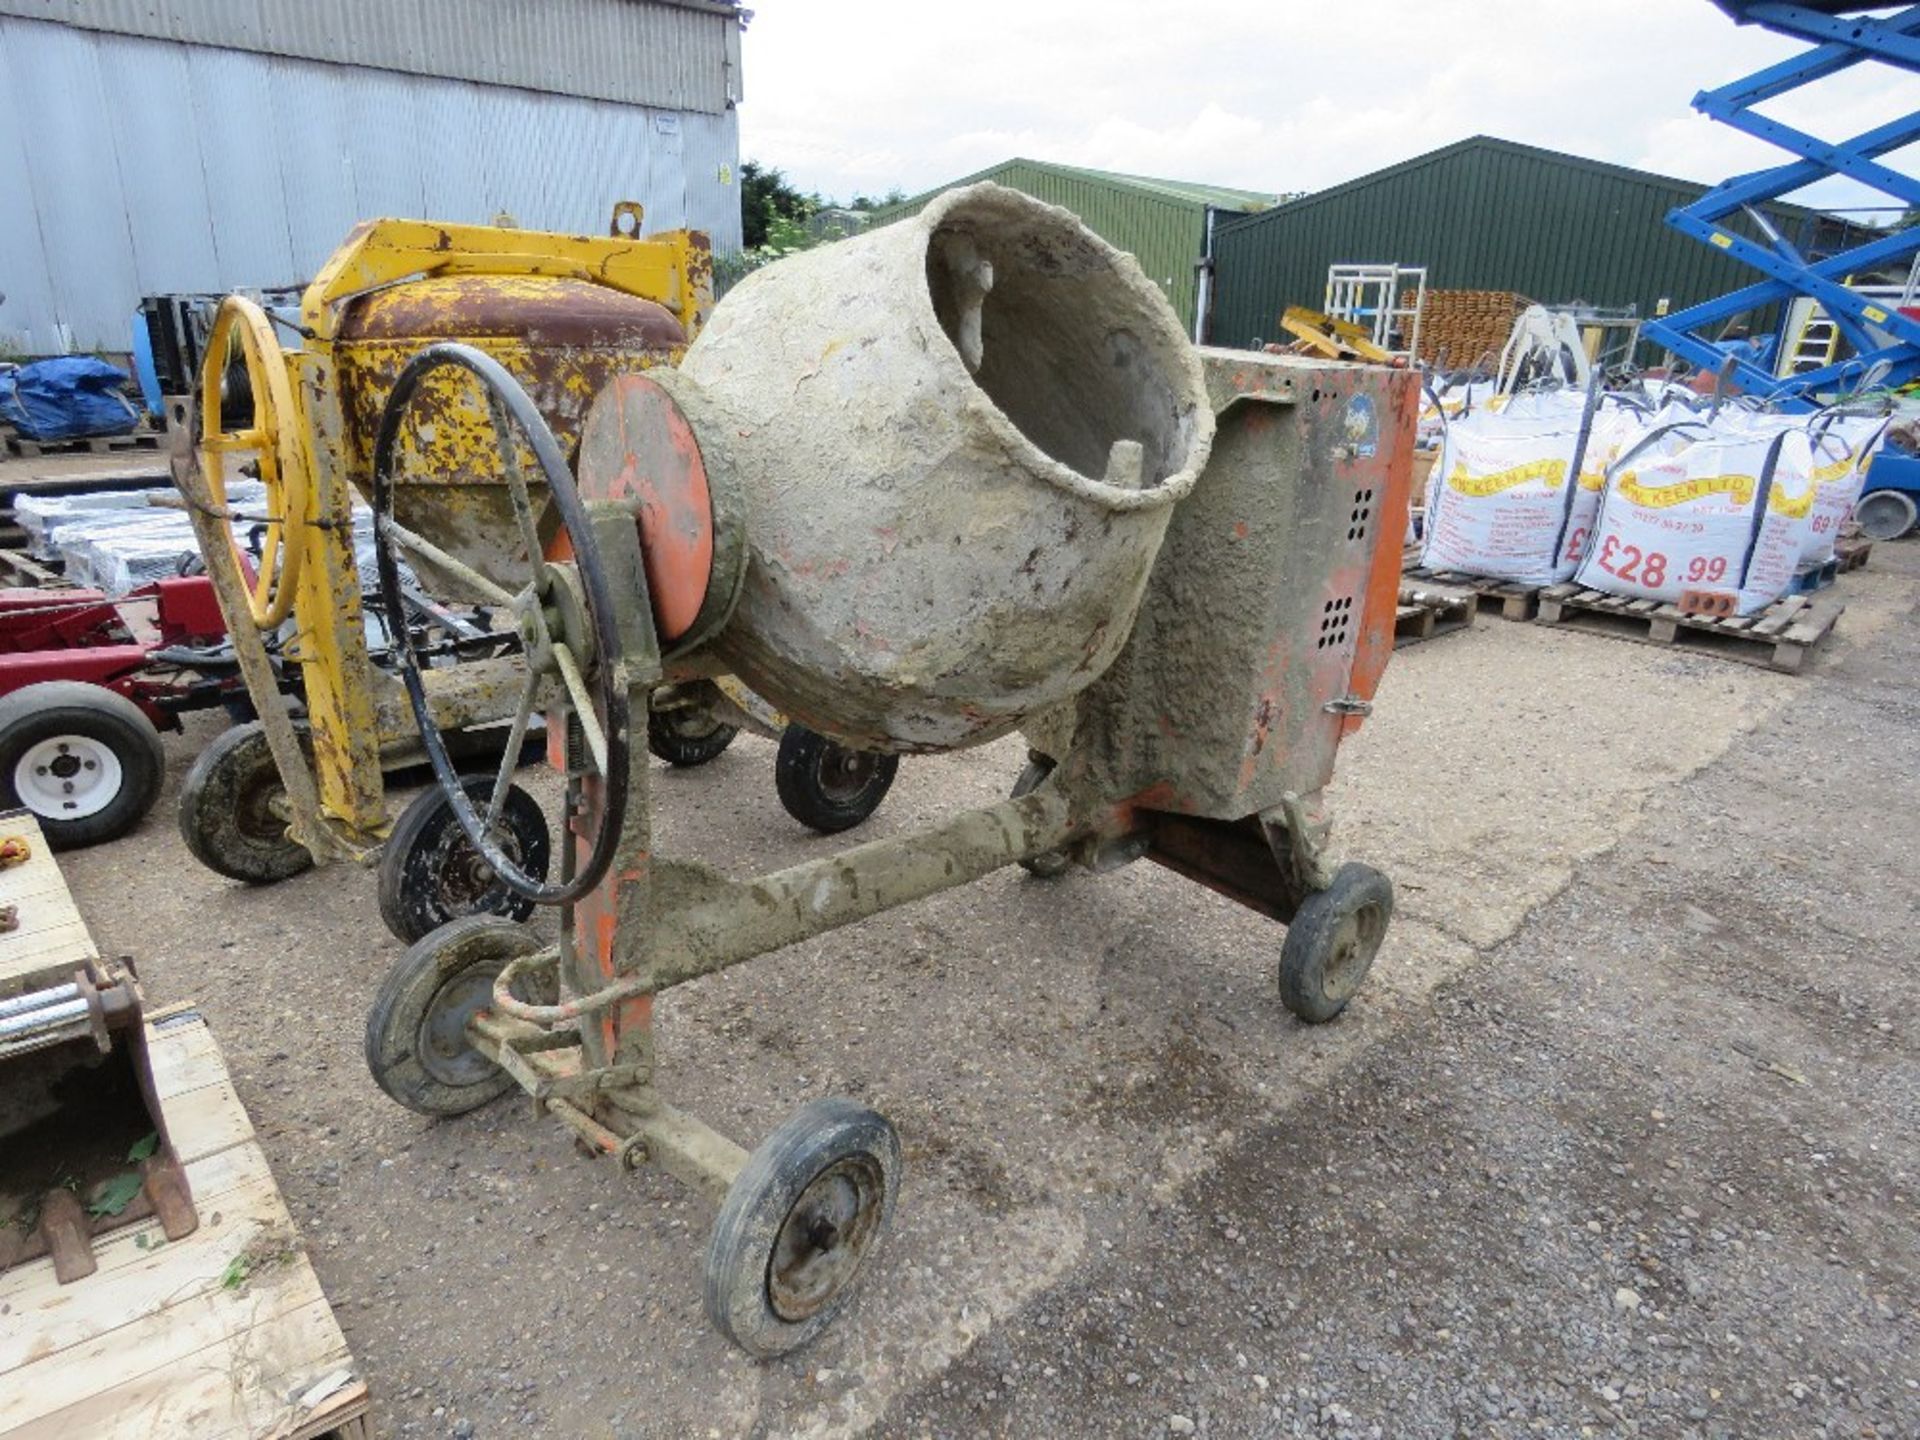 BELLE 100XT LISTER HANDLE START DIESEL SITE MIXER WITH HANDLE. - Image 3 of 5